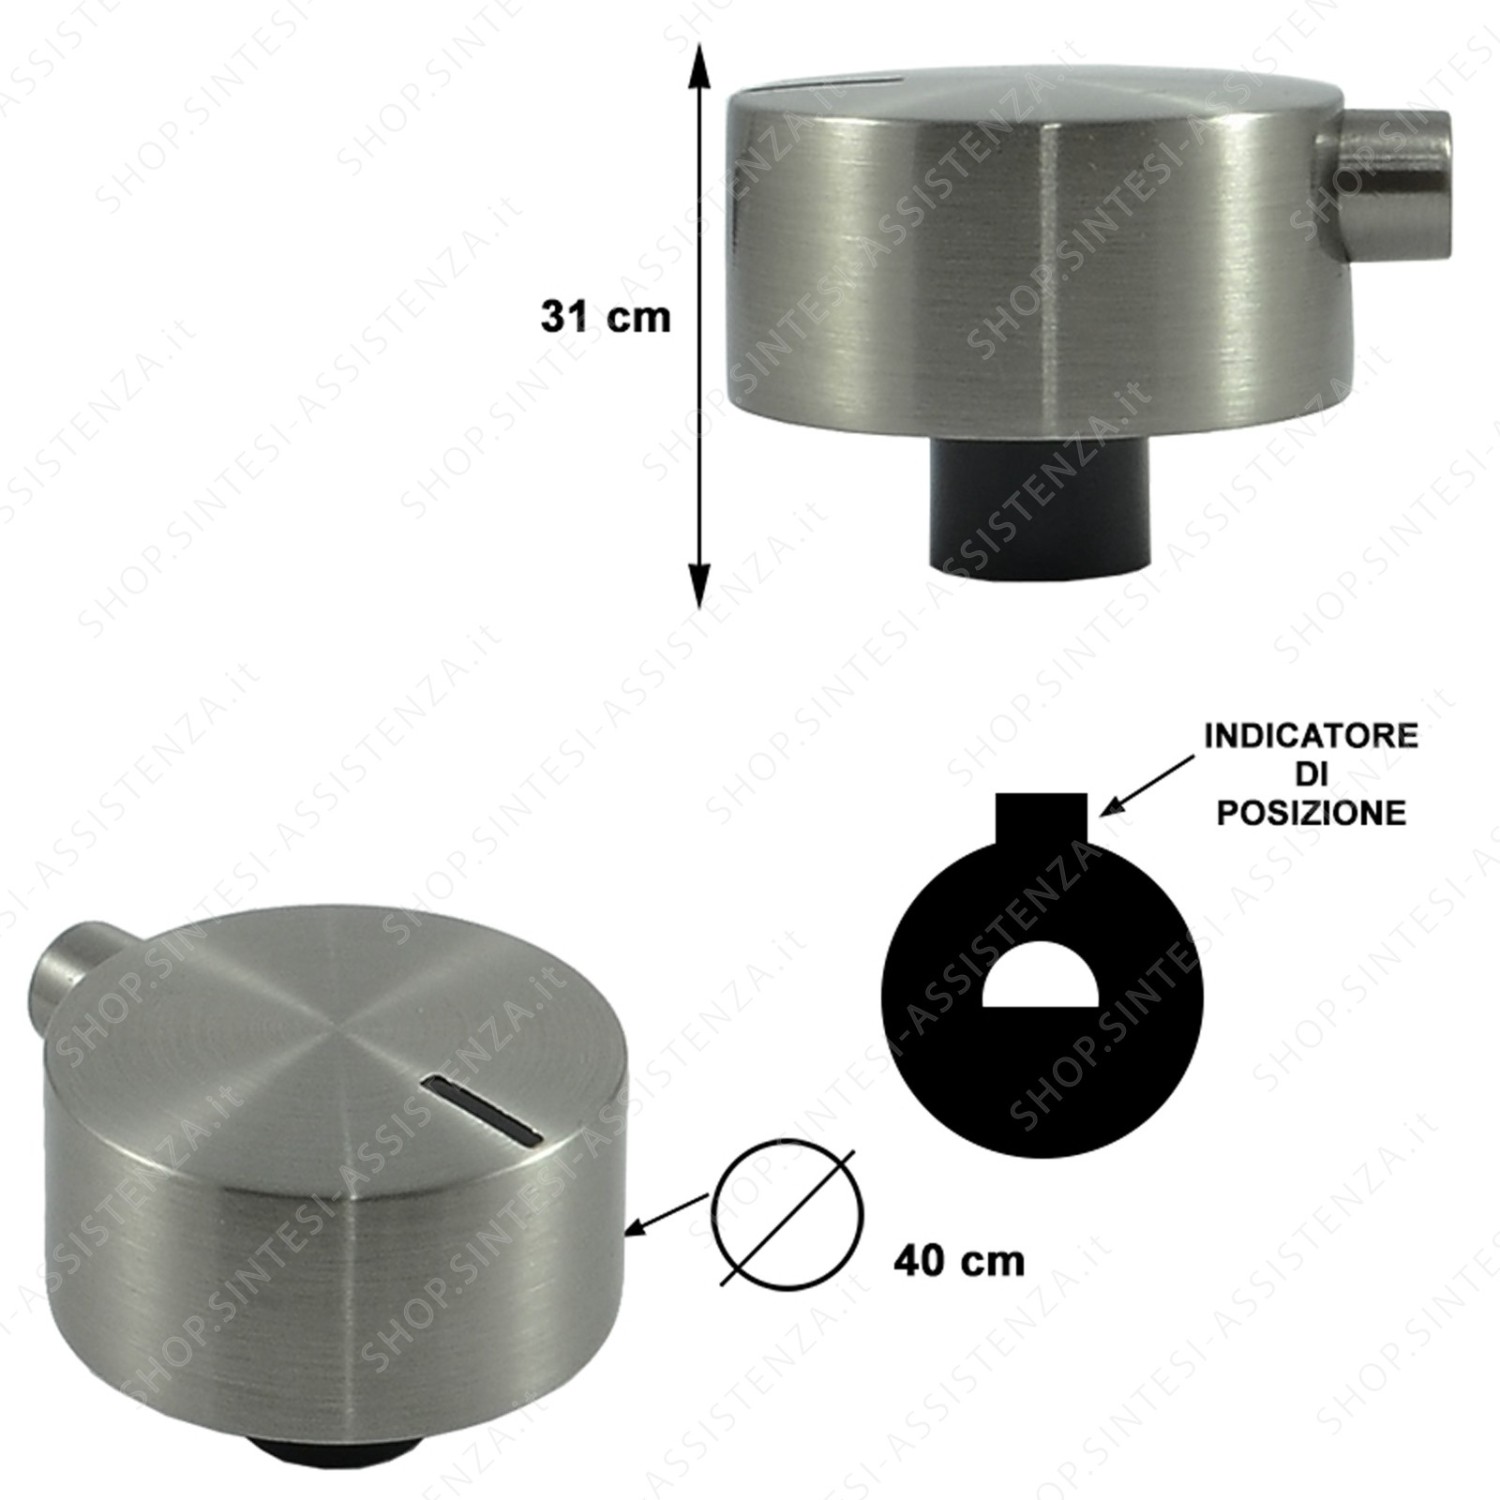 FOSTER HOB KNOB IN ZAMAK WITH BRUSHED STEEL FINISH - 9601379